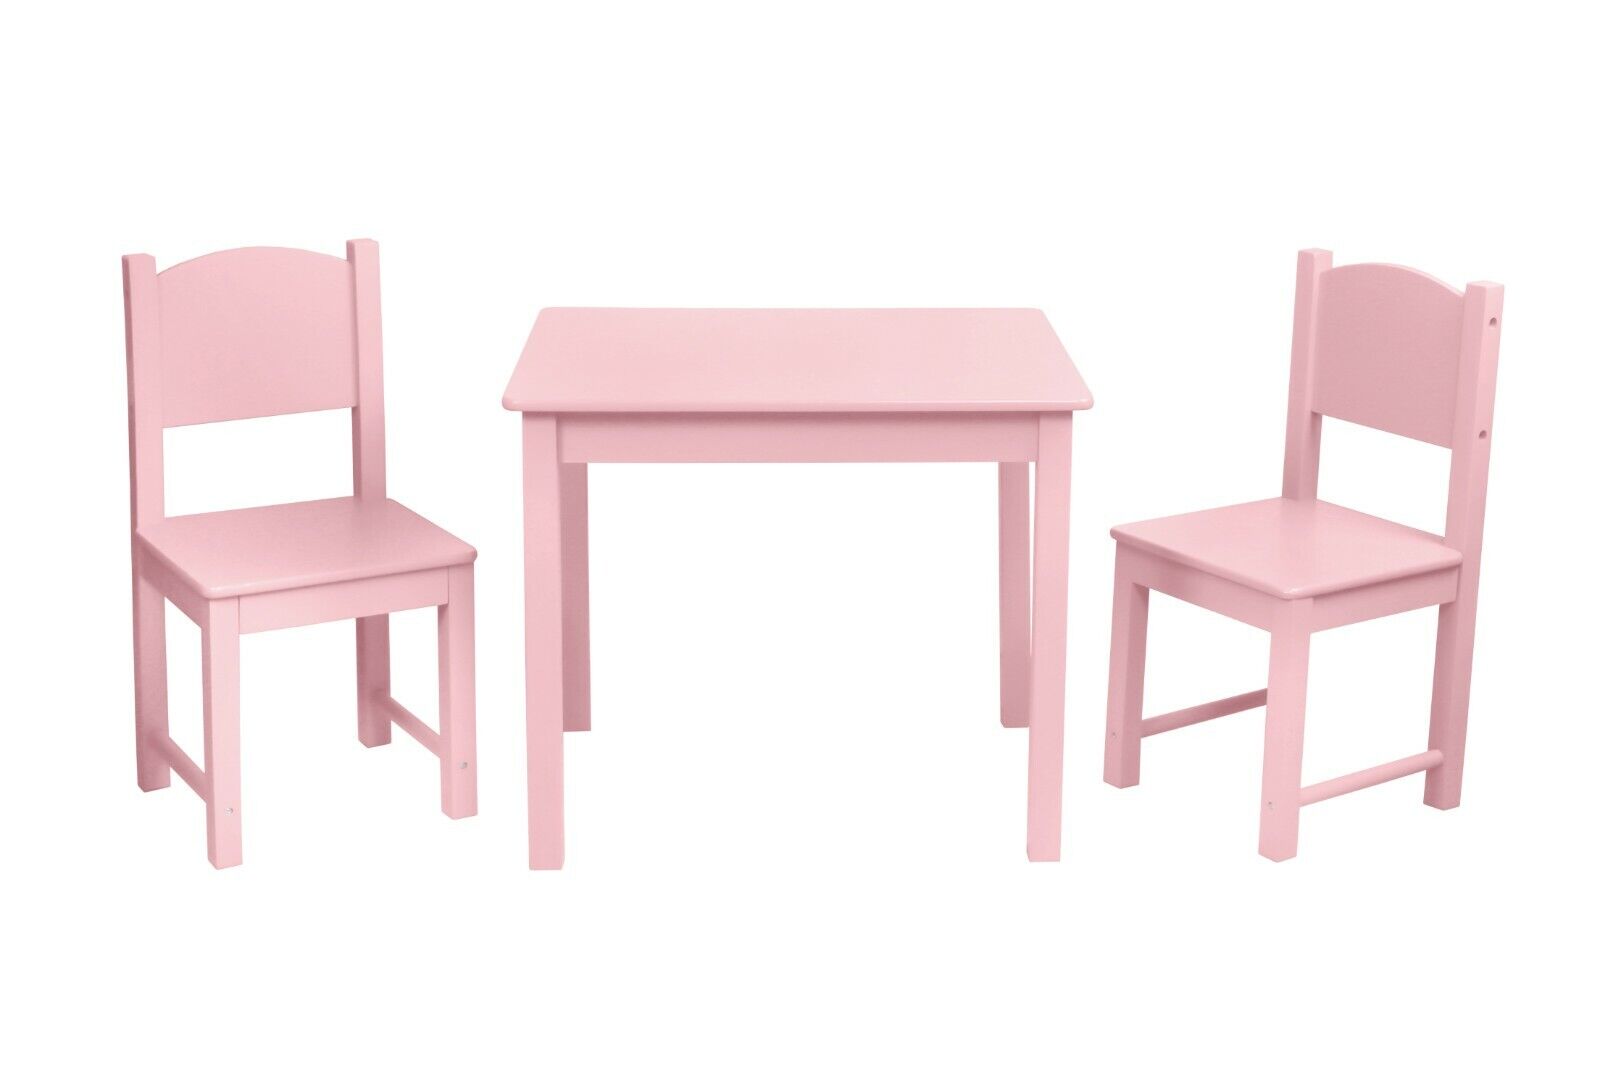 KIDS CHILDRENS TABLE AND 2 CHAIRS SET FOR BOYS OR GIRLS BEST GIFT BIRTHDAY XMAS